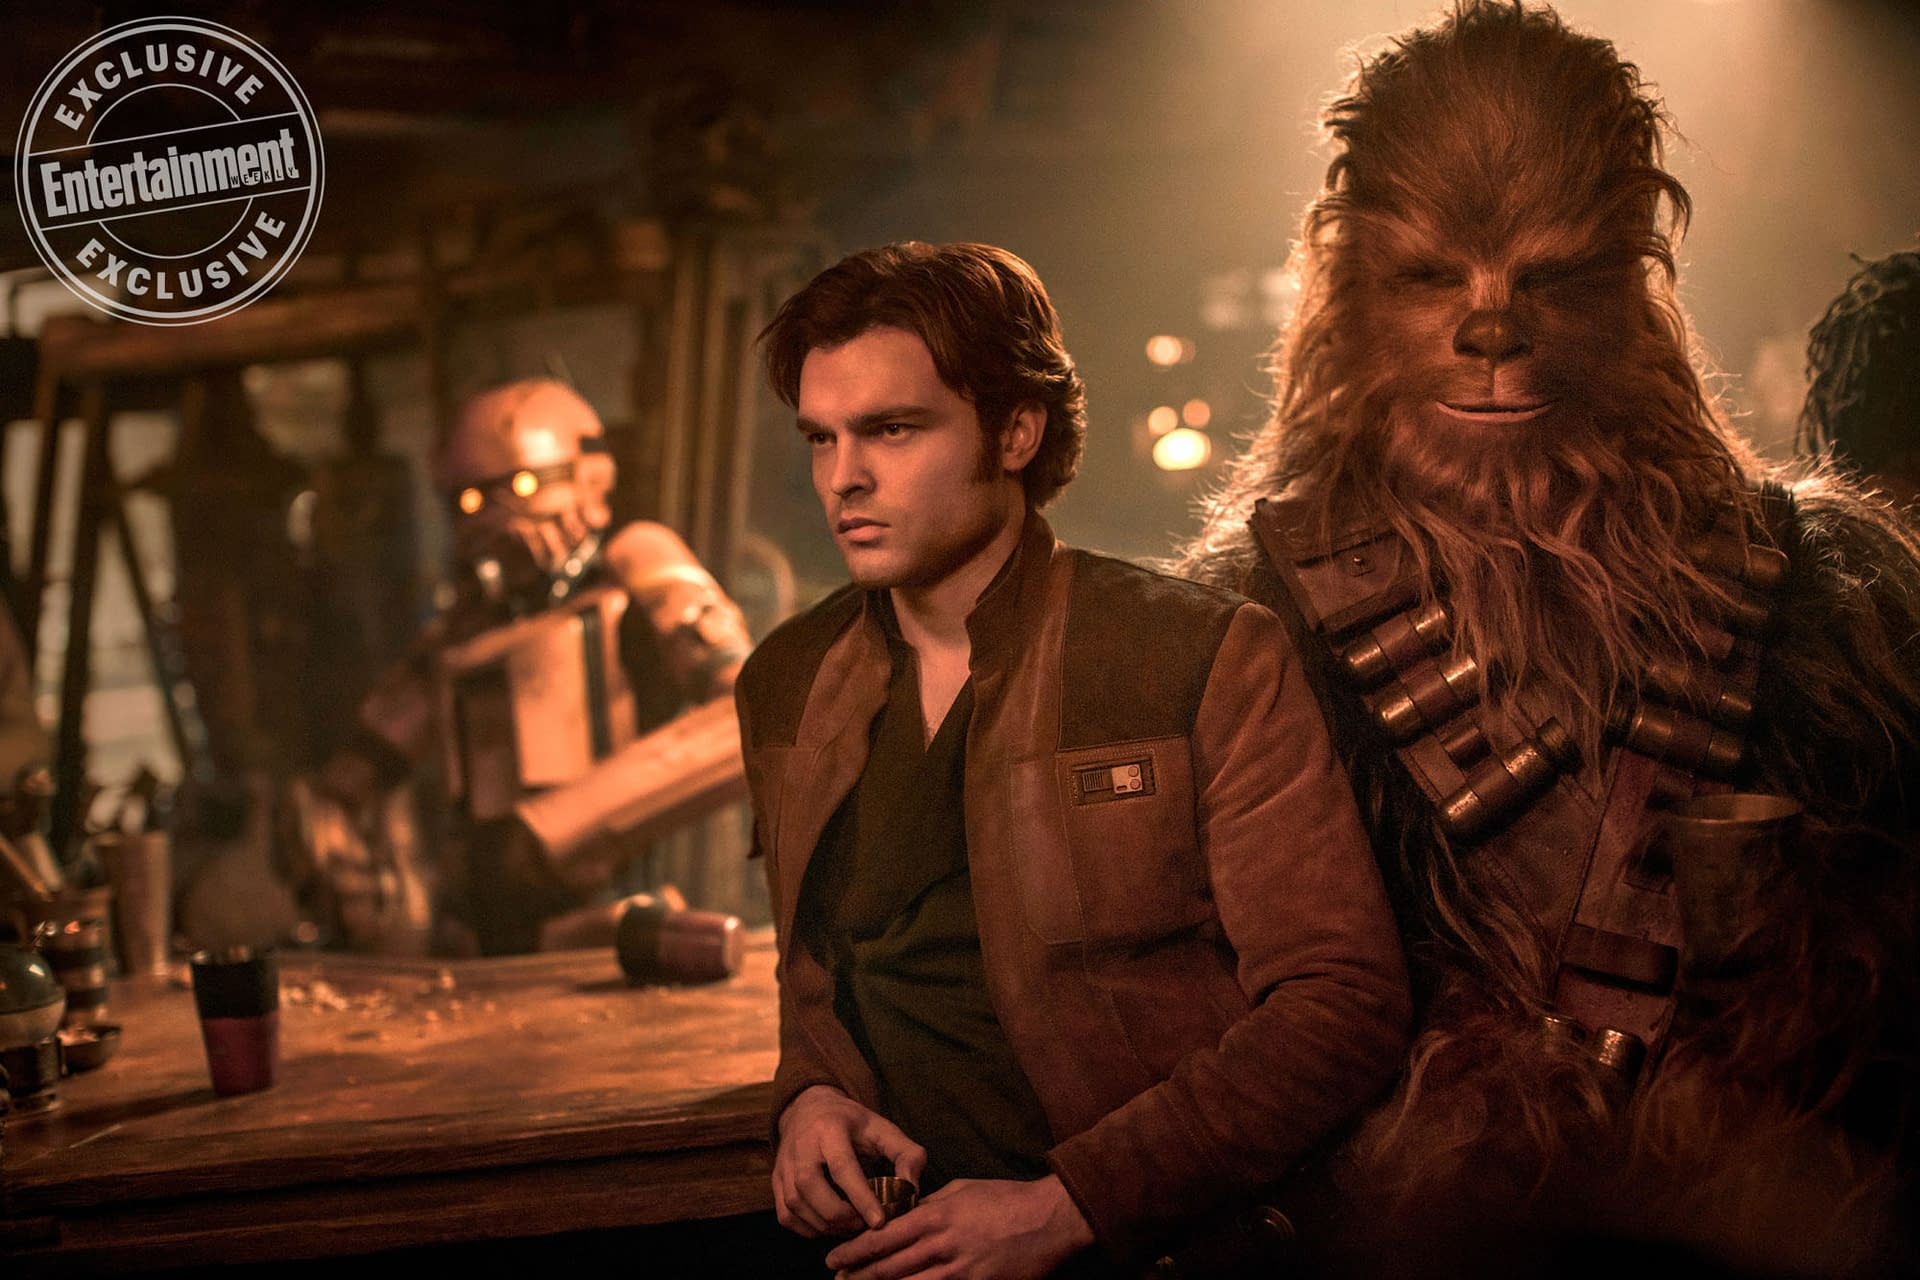 Solo: A Star Wars Story &#8211; New Image and Advanced Ticket Sales